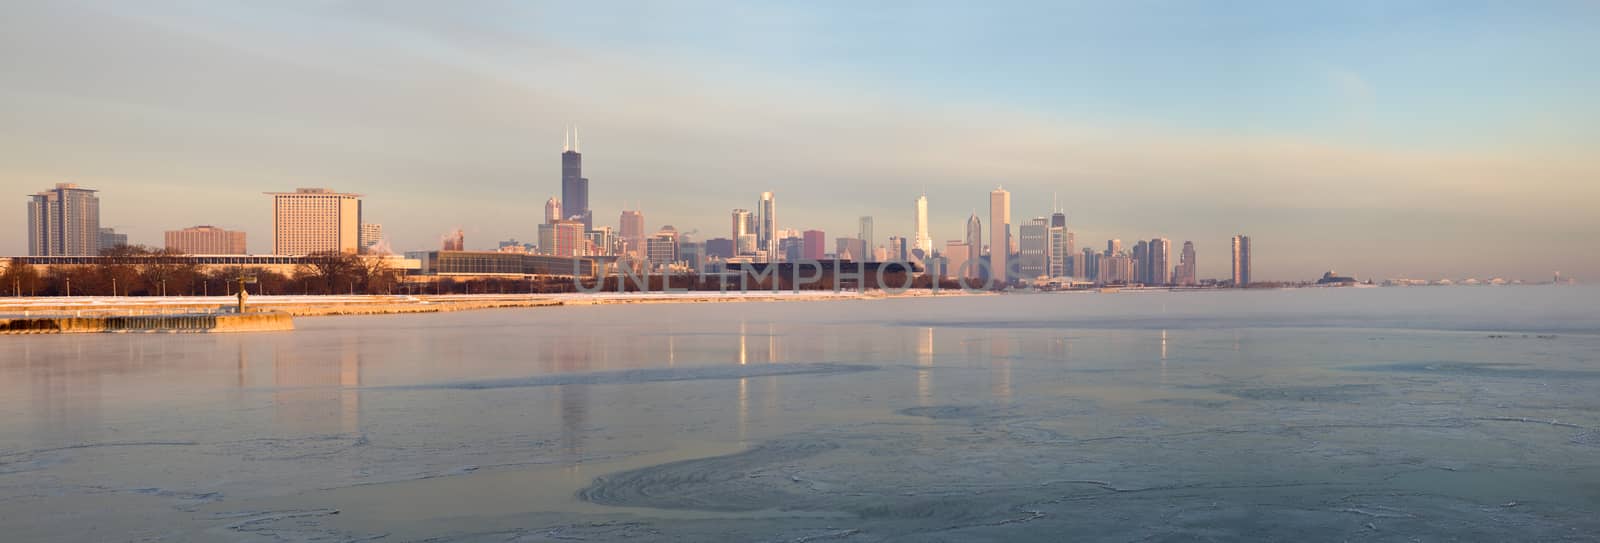 Panorama of Chicago at sunrise by benkrut